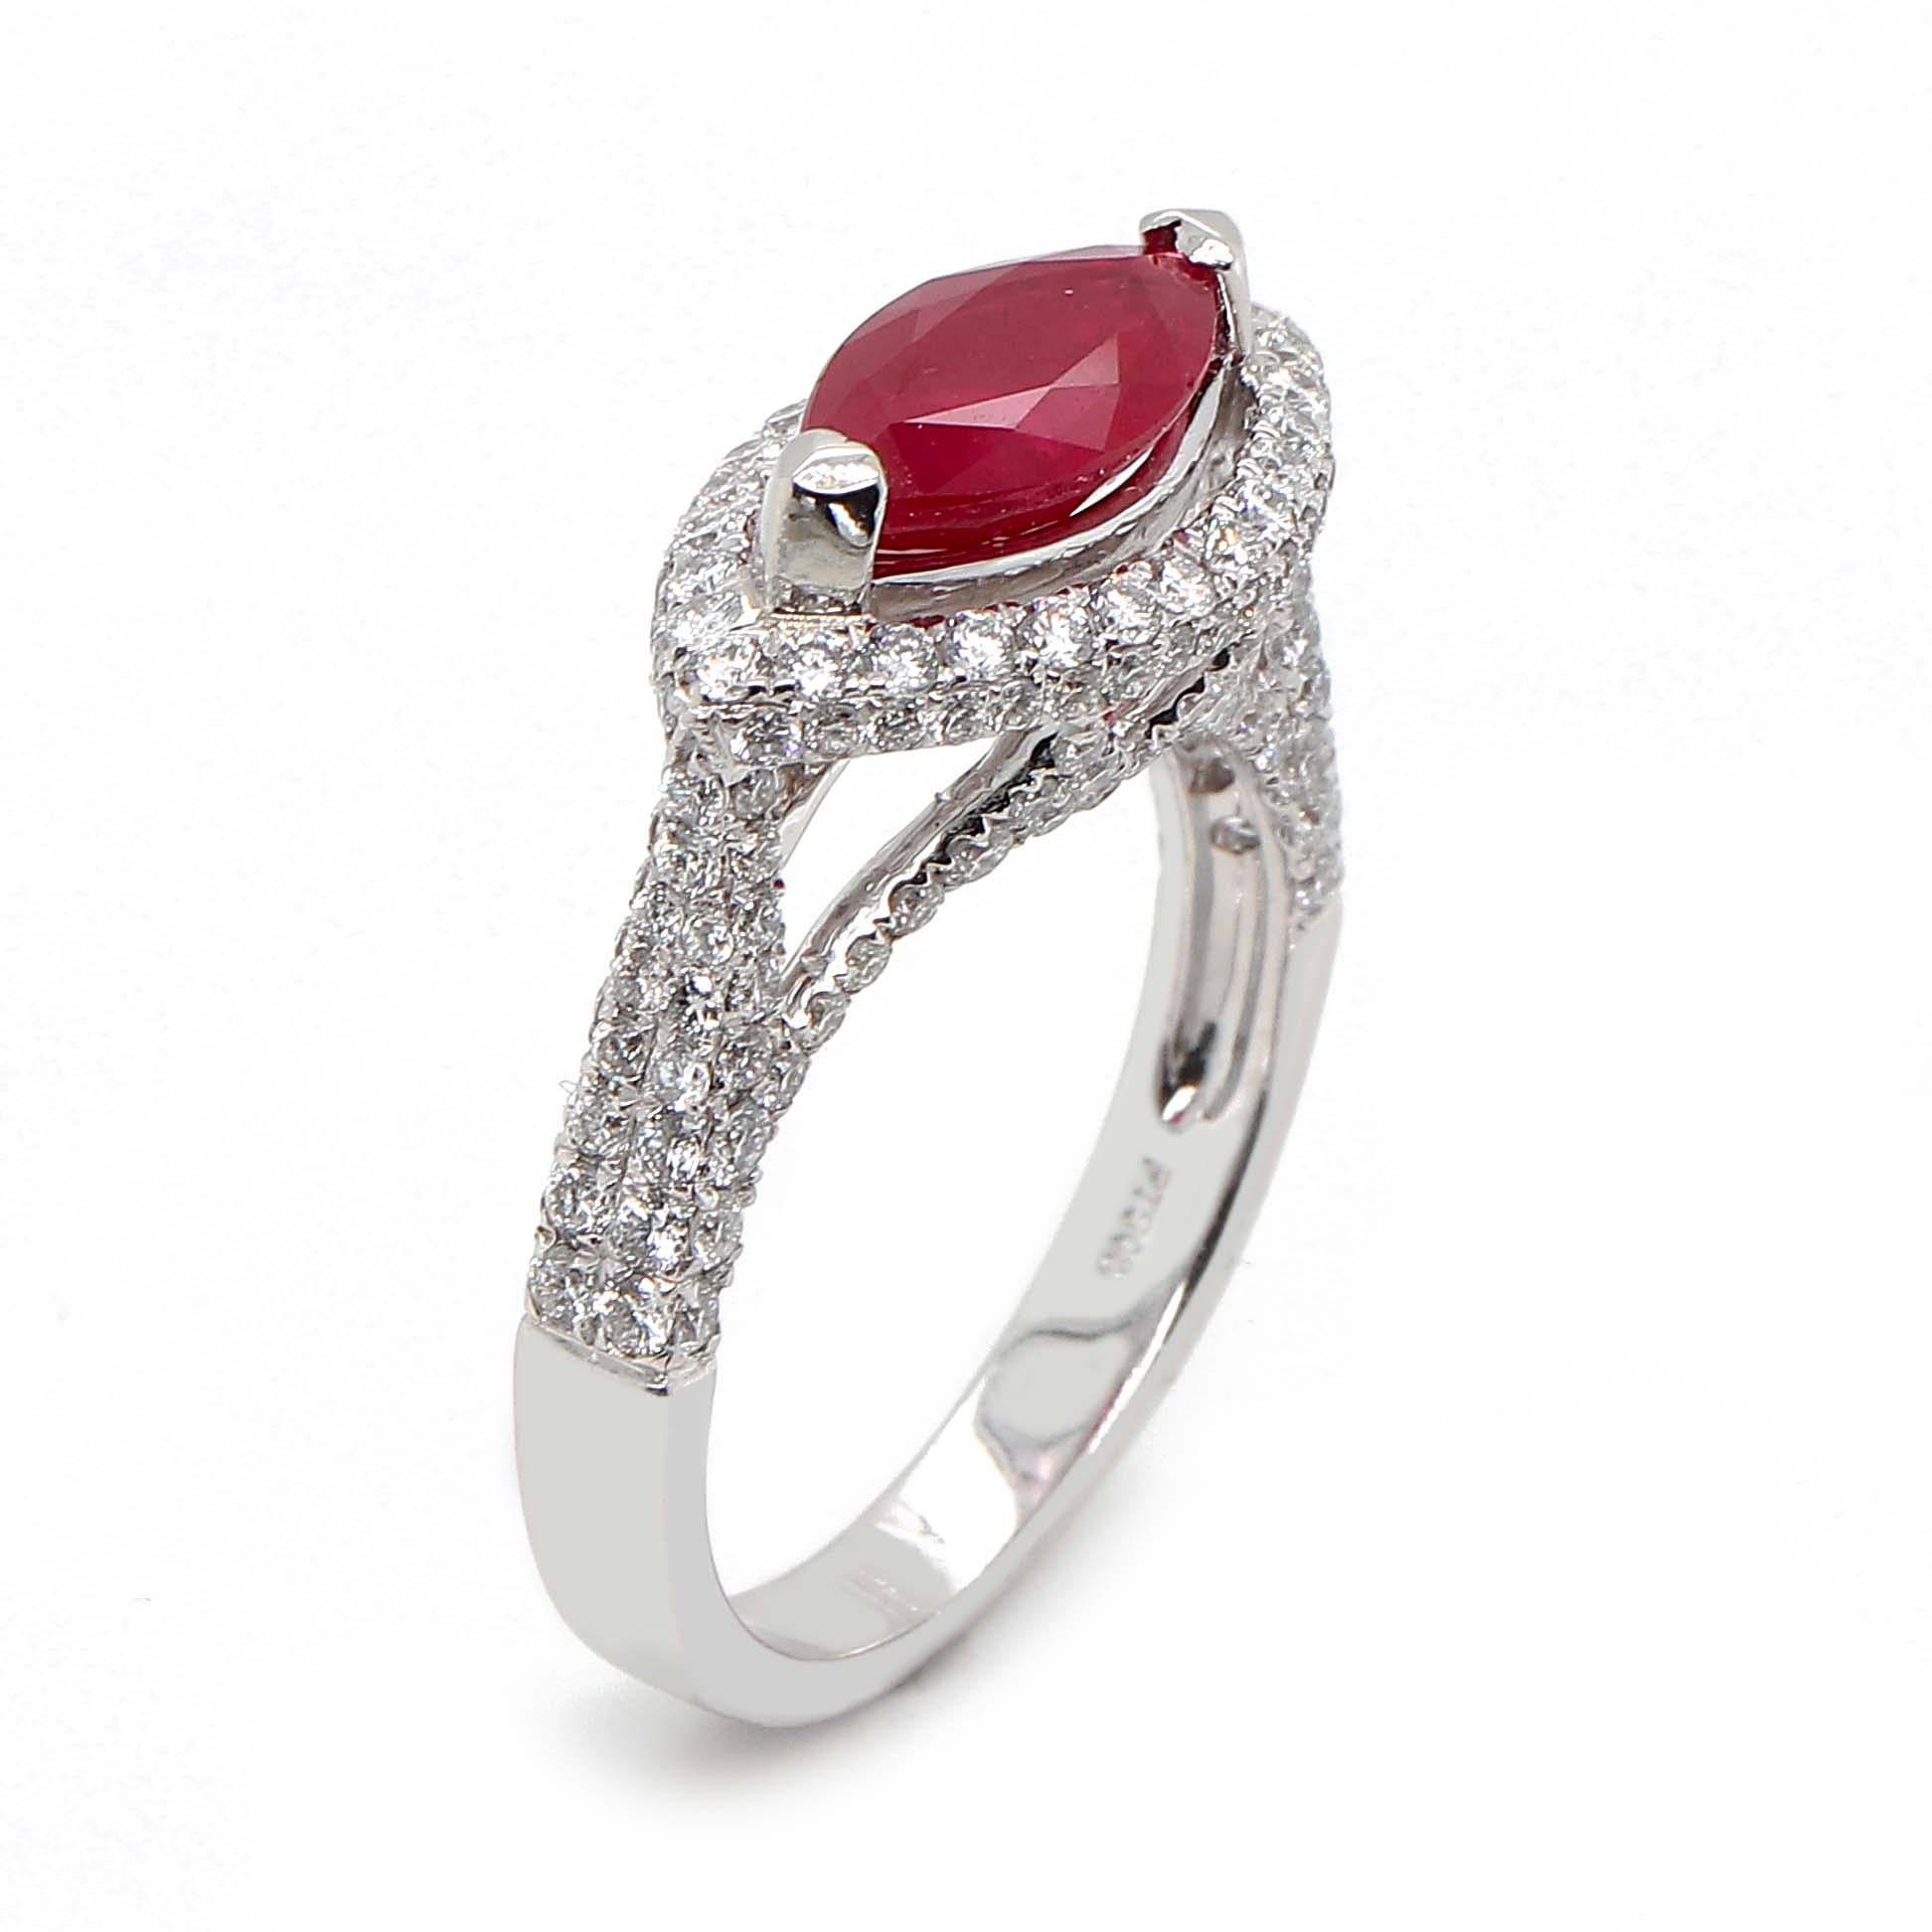 Marquise cut Ruby of about 1.69 carats certified as GIA. The ruby is set in a two prong surrounded by 160 round brilliant cut diamonds of about 1.14 carats, Clarity VS and Color G. All stones are set in a platinum ring with a total weight of 7.15